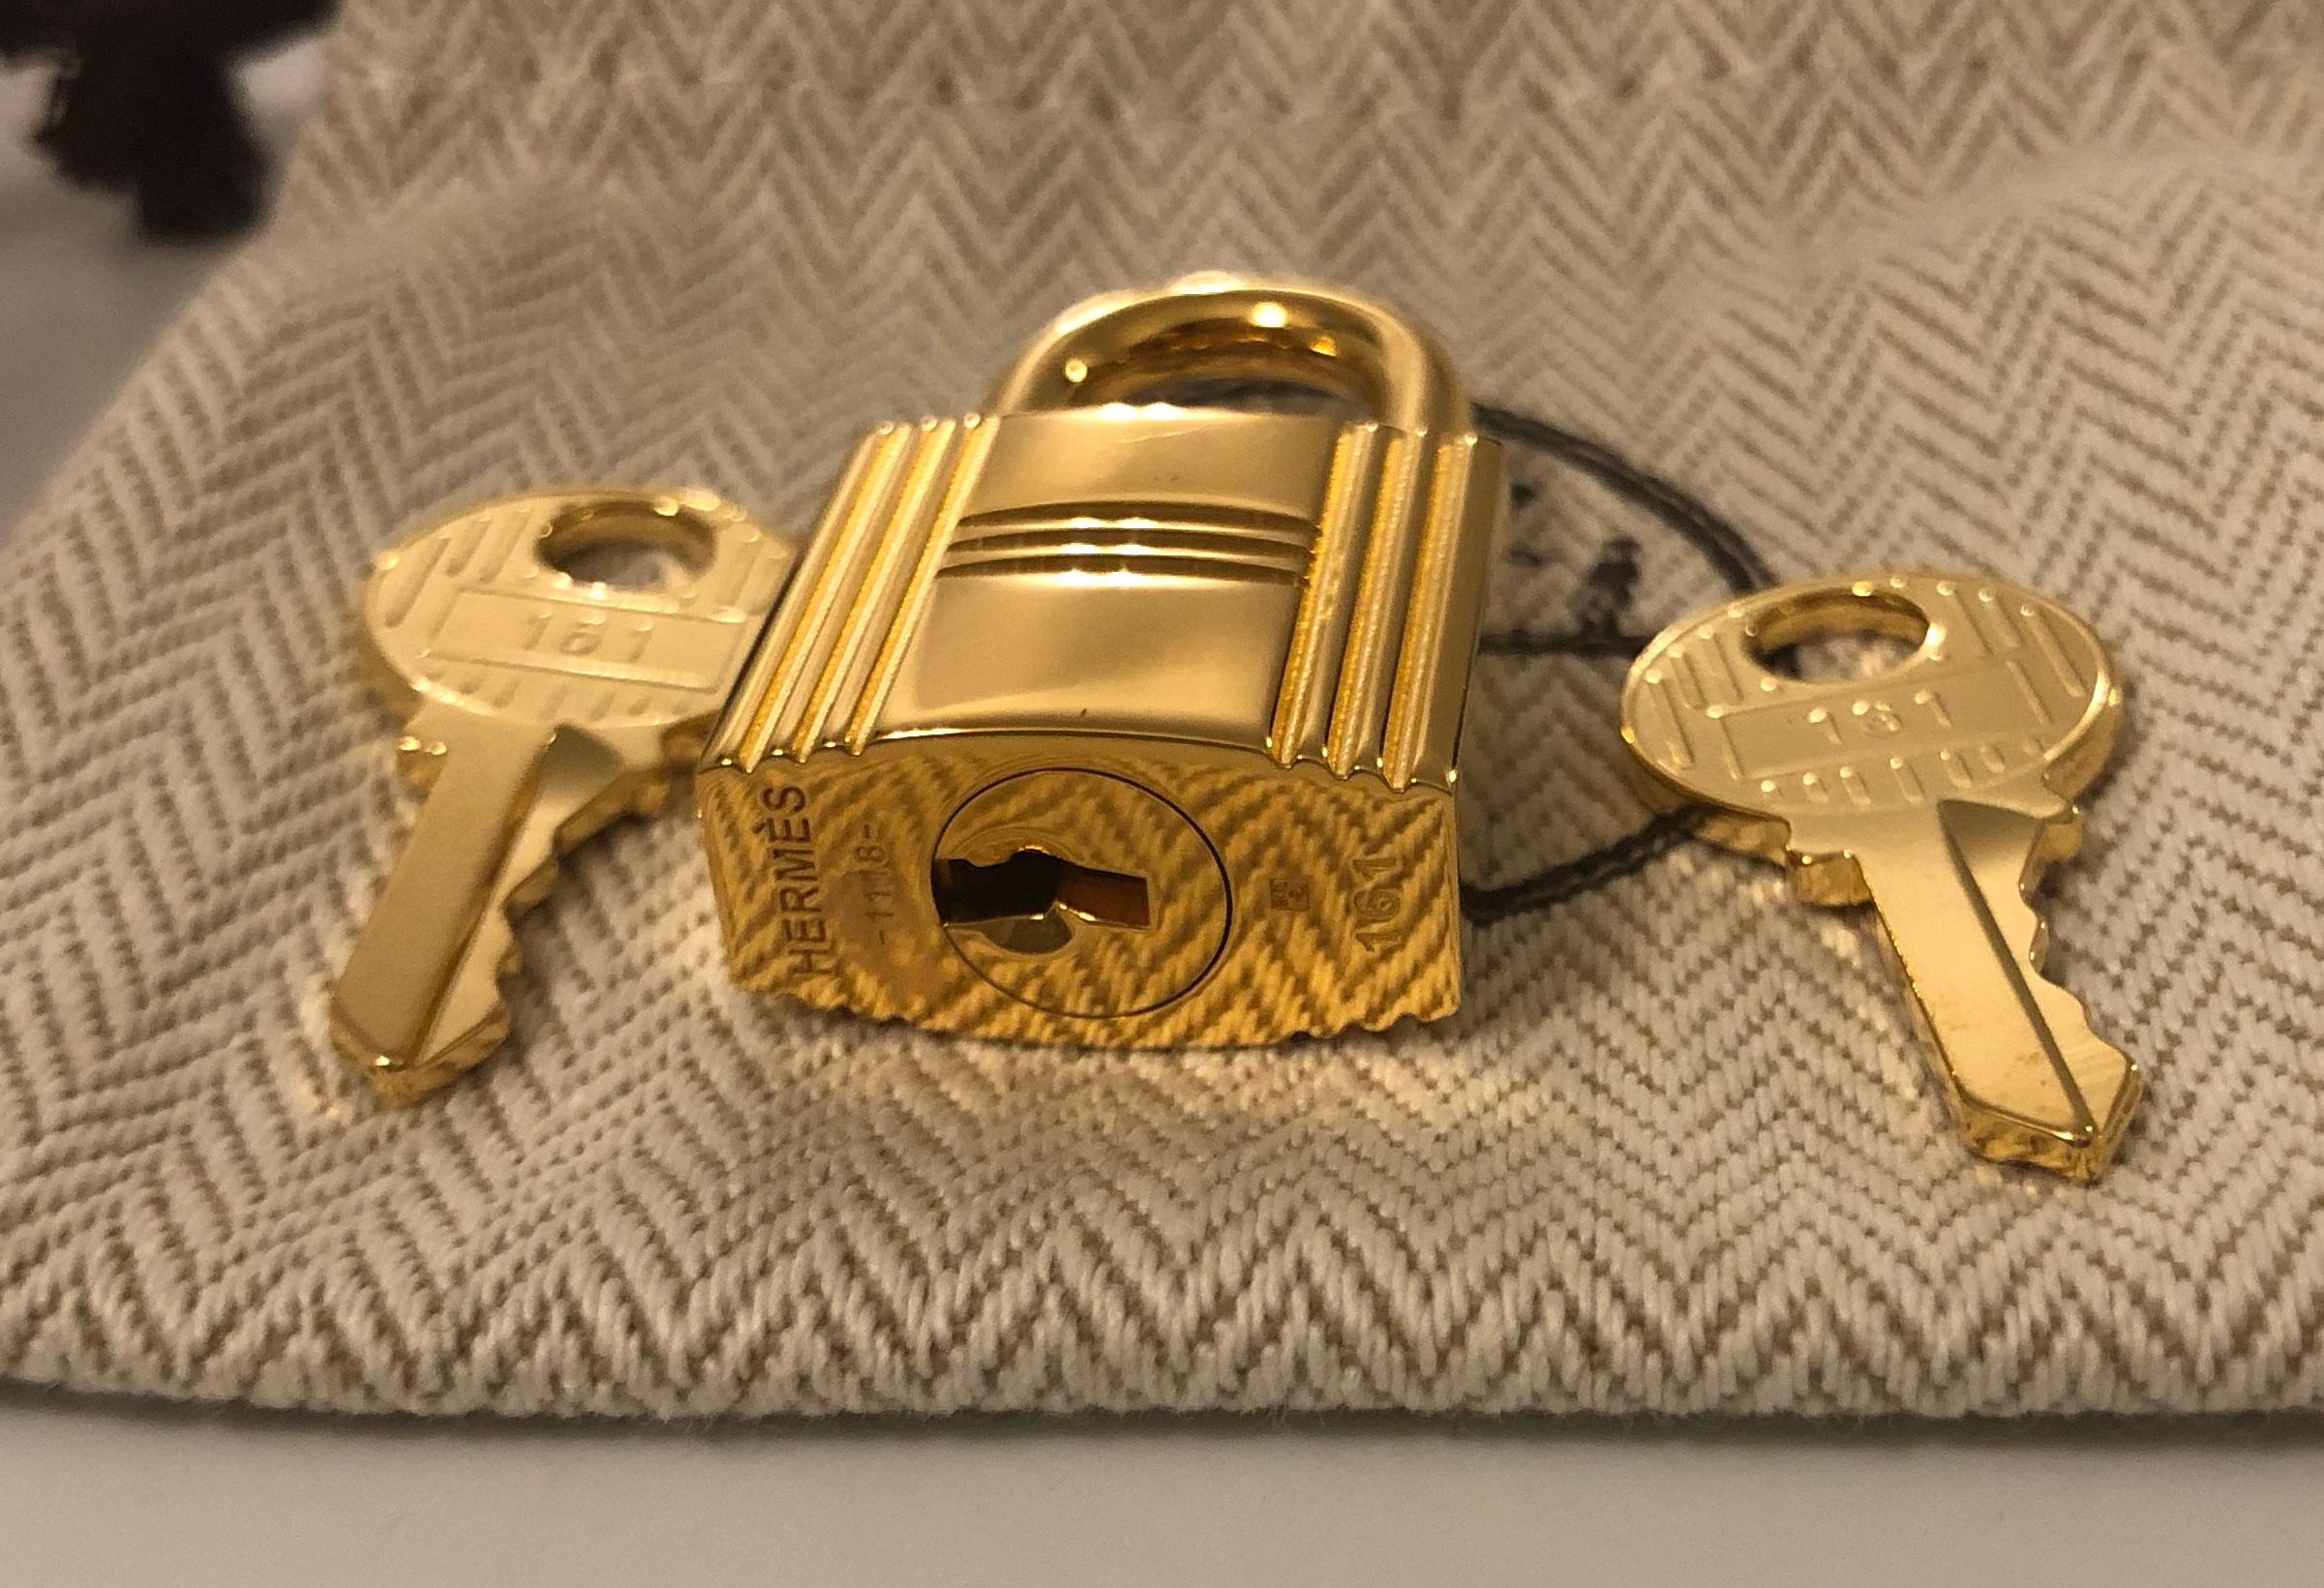 Hermès gold plated padlock.
Dimensions: 3.7 * 2 * 1
Number of padlock: 161
Sold with 2 keys and dustbag.
Brand new.